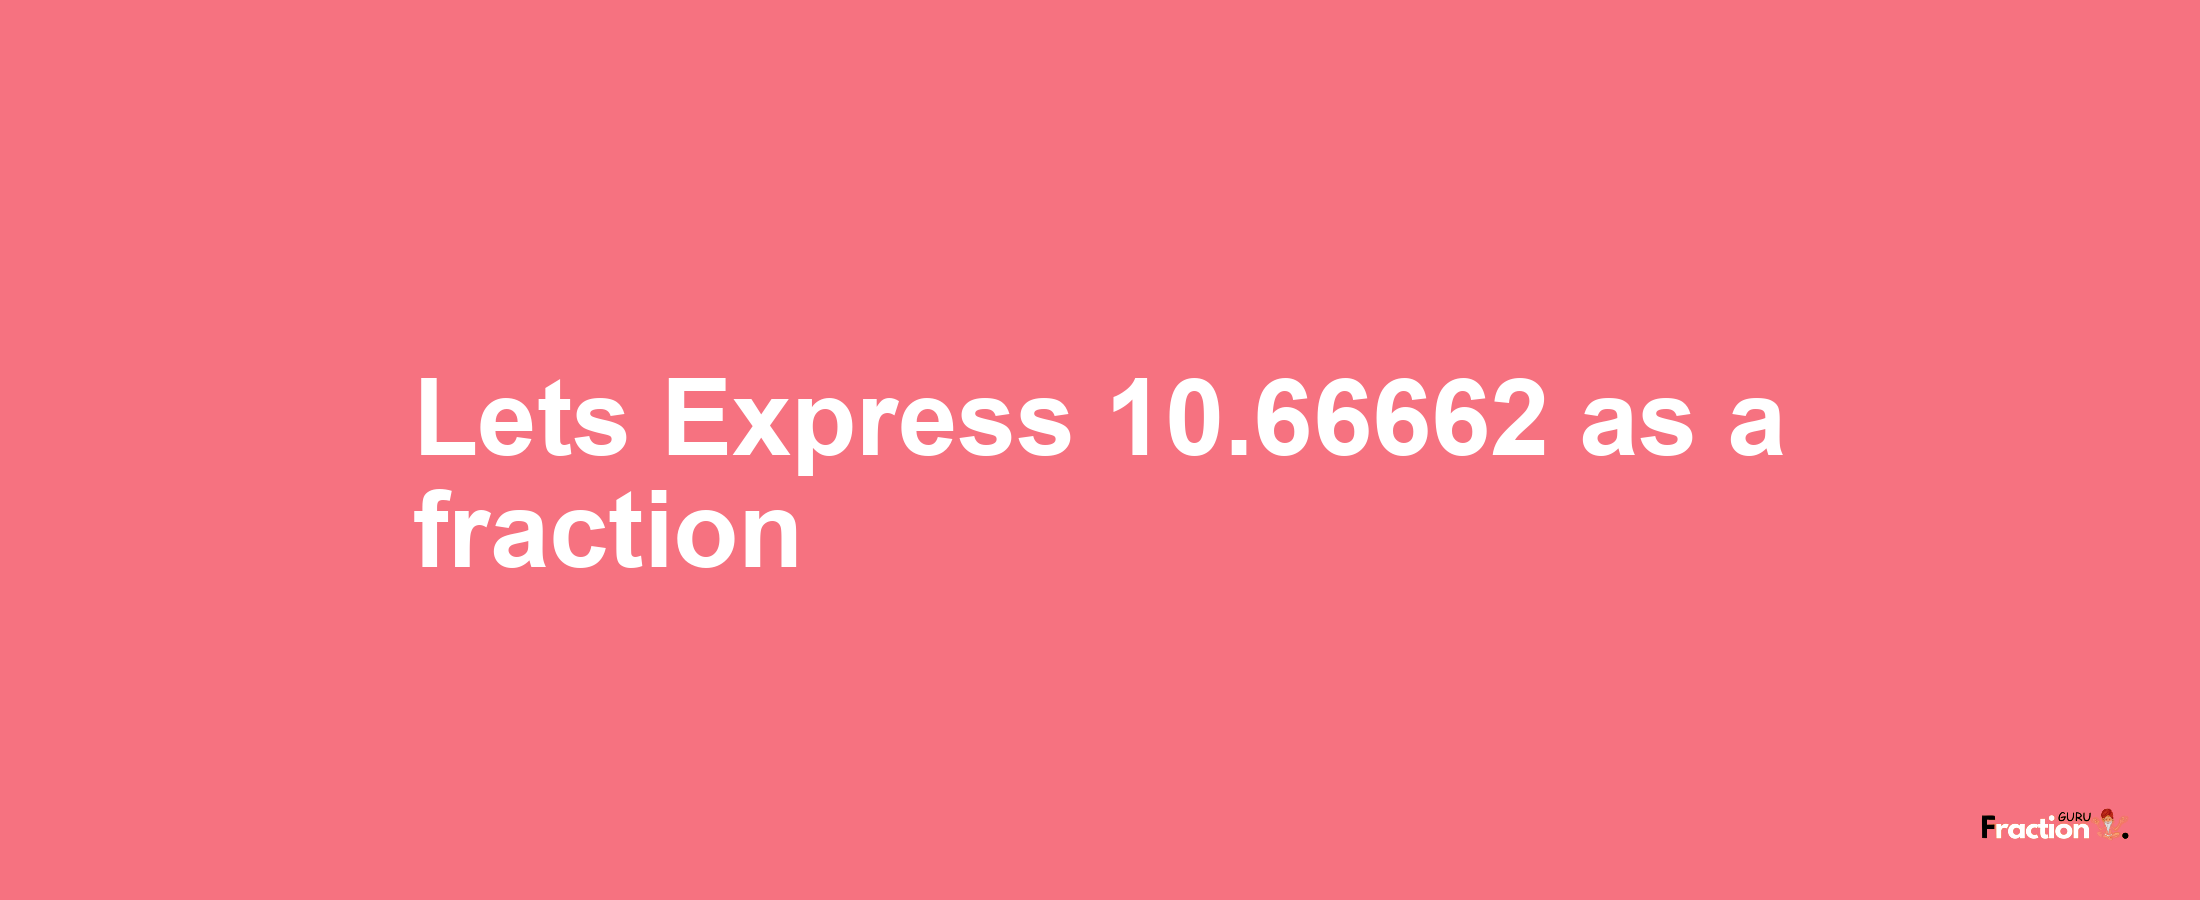 Lets Express 10.66662 as afraction